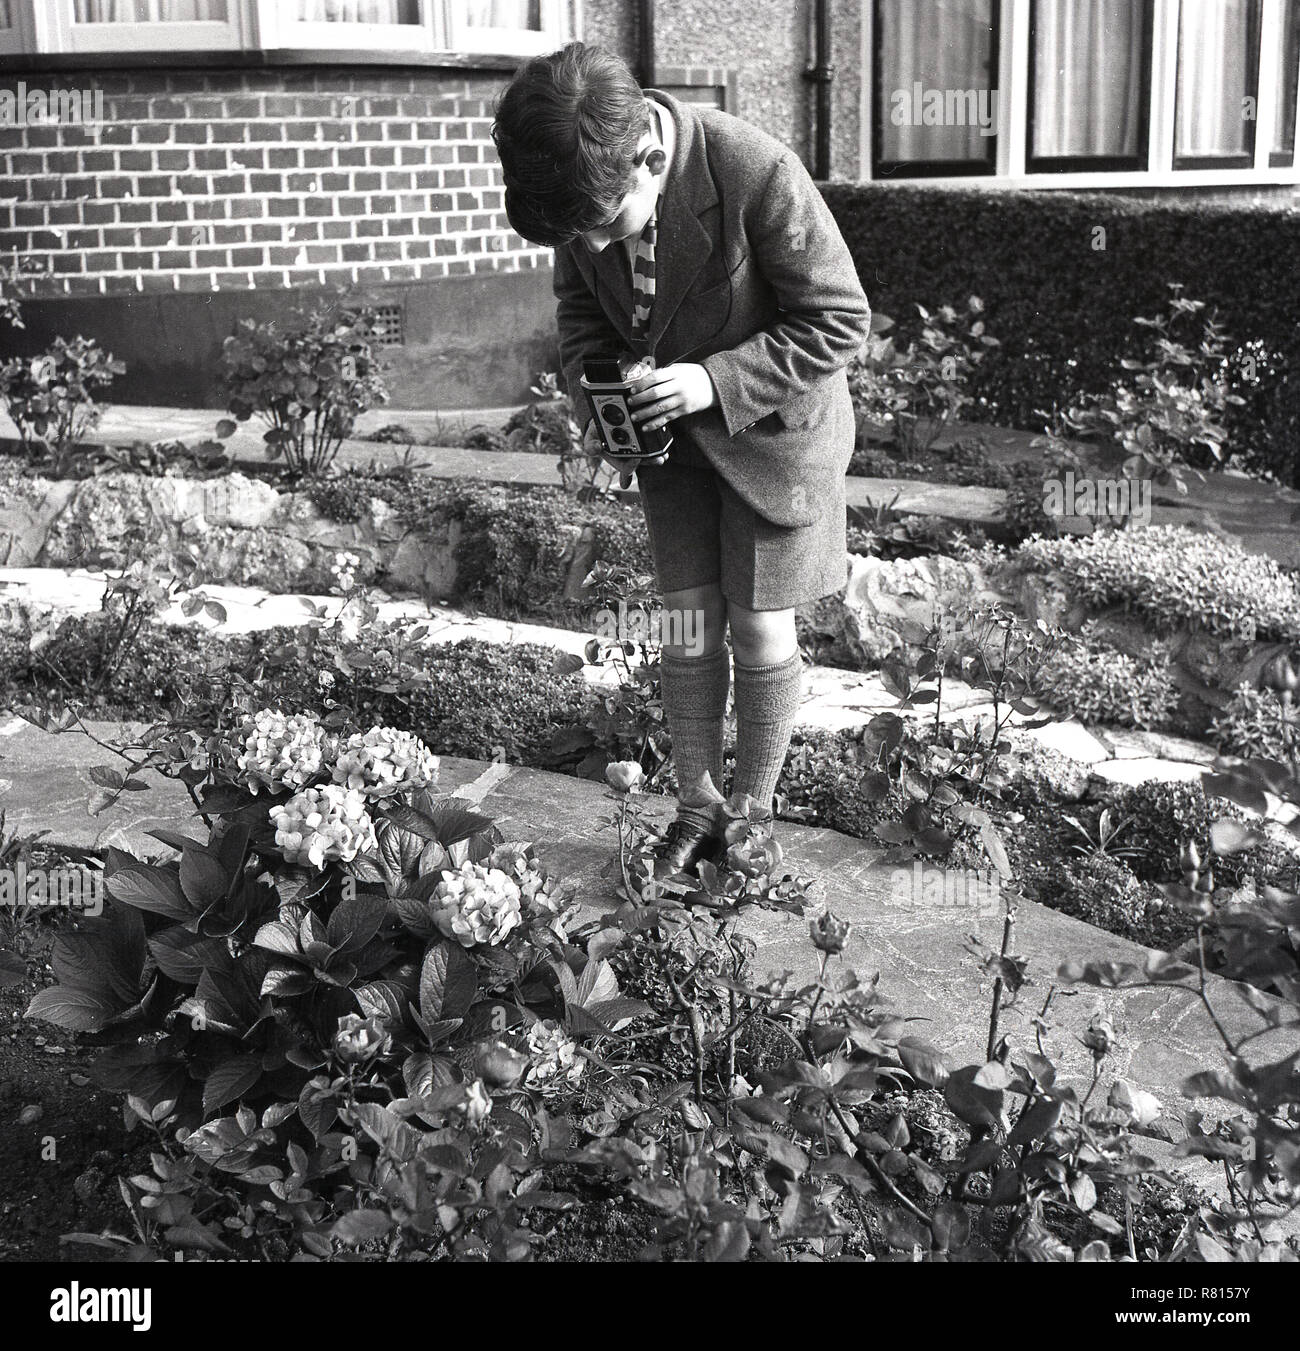 1950s, historical, film photography, a schoolboy outside a floral garden taking pictures of flowers with a Kodak 'Brownie' reflex film camera, England, UK. A fixed focus, twin-lens camera, it was a simple but popular camera of the era, particularly with those starting out in photography. Stock Photo